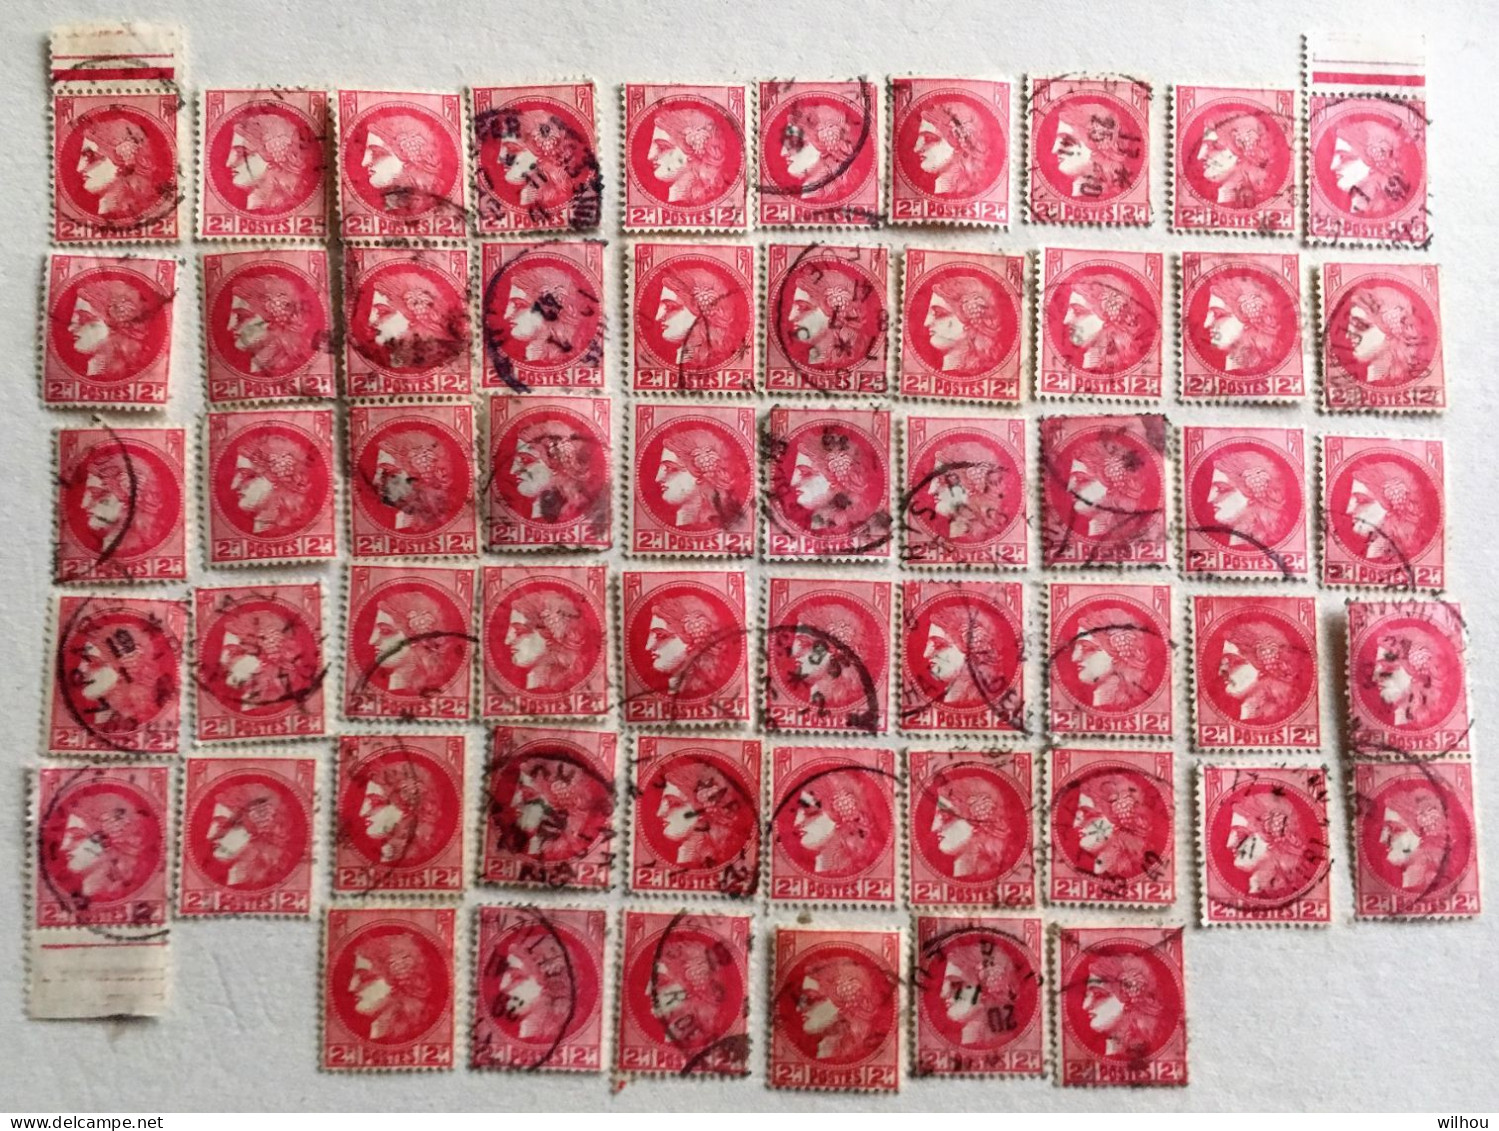 LOT DE 56 TIMBRES OBLITERES TYPE CERES A 2 F ROSE ROUGE   N°373 YT - 1945-47 Ceres Of Mazelin